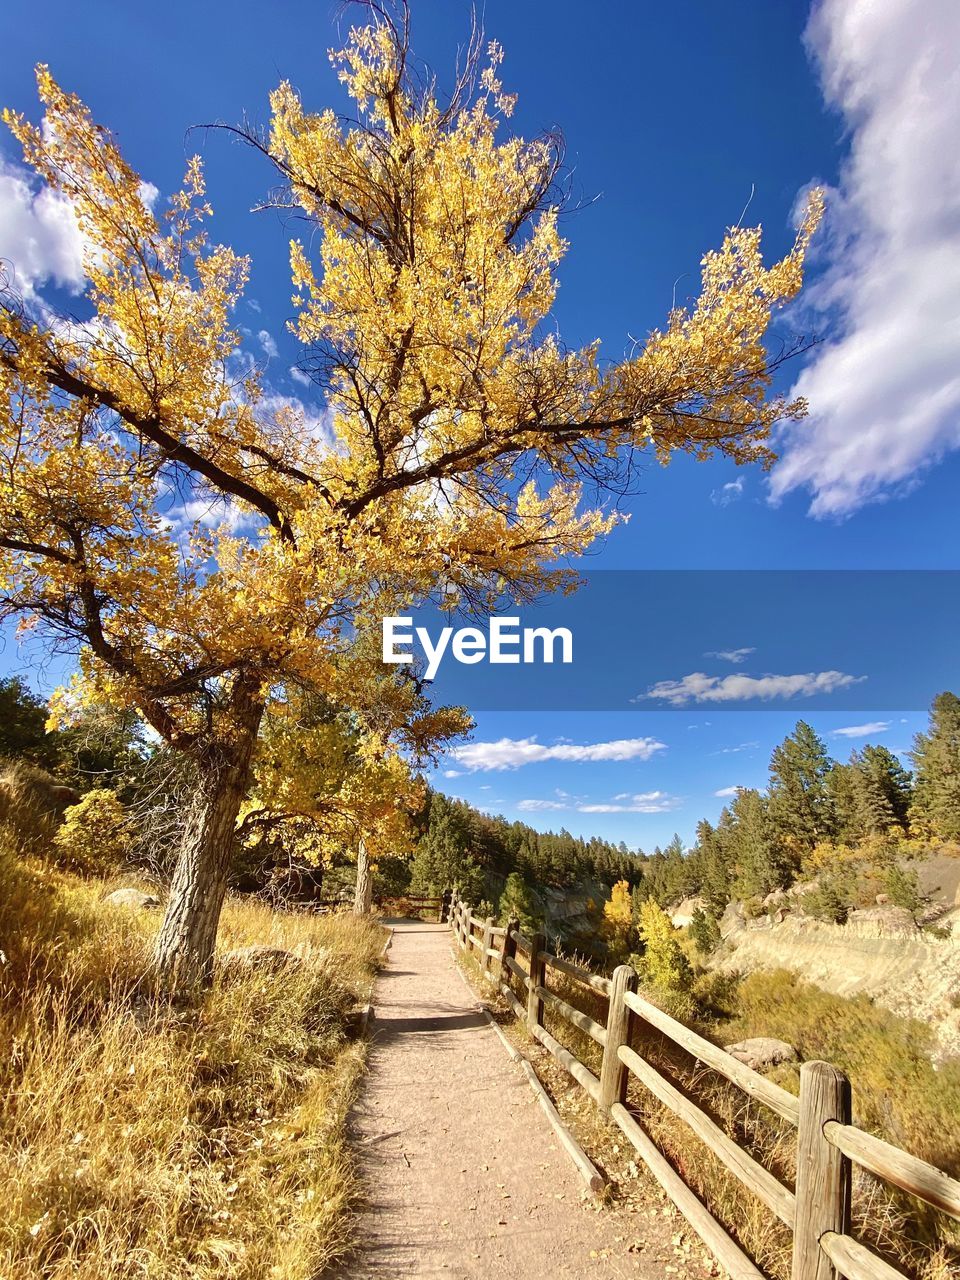 A golden lined path through castlewood canyon in franktown colorado.